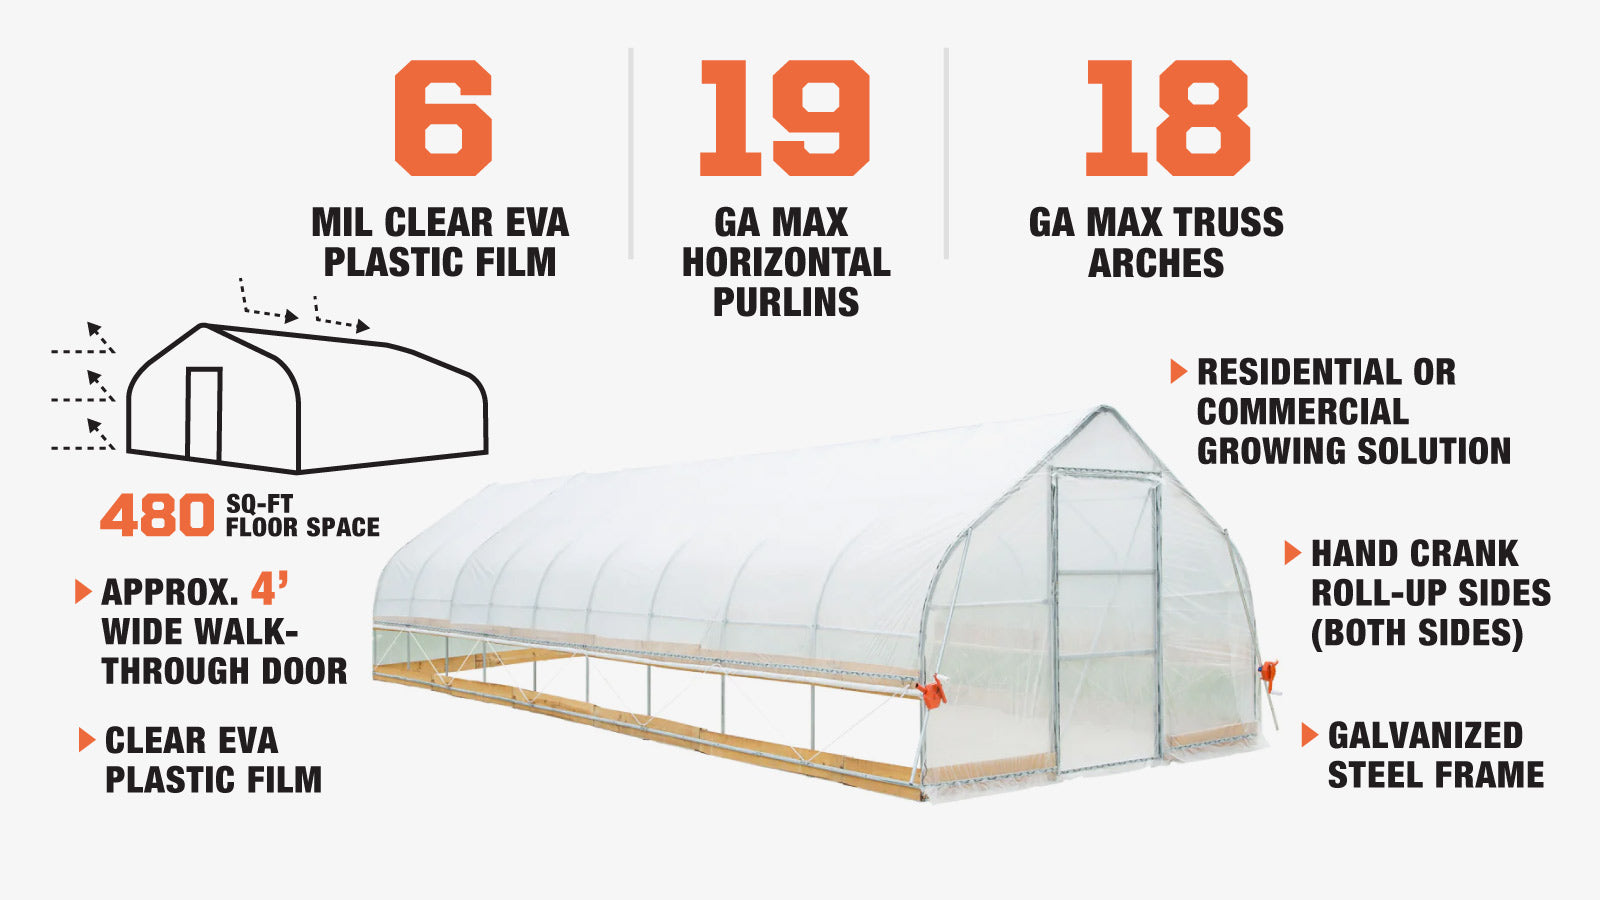 TMG Industrial 12’ x 40’ Tunnel Greenhouse Grow Tent w/6 Mil Clear EVA Plastic Film, Cold Frame, Hand Crank Roll-Up Sides, Peak Ceiling Roof, TMG-GH1240-description-image